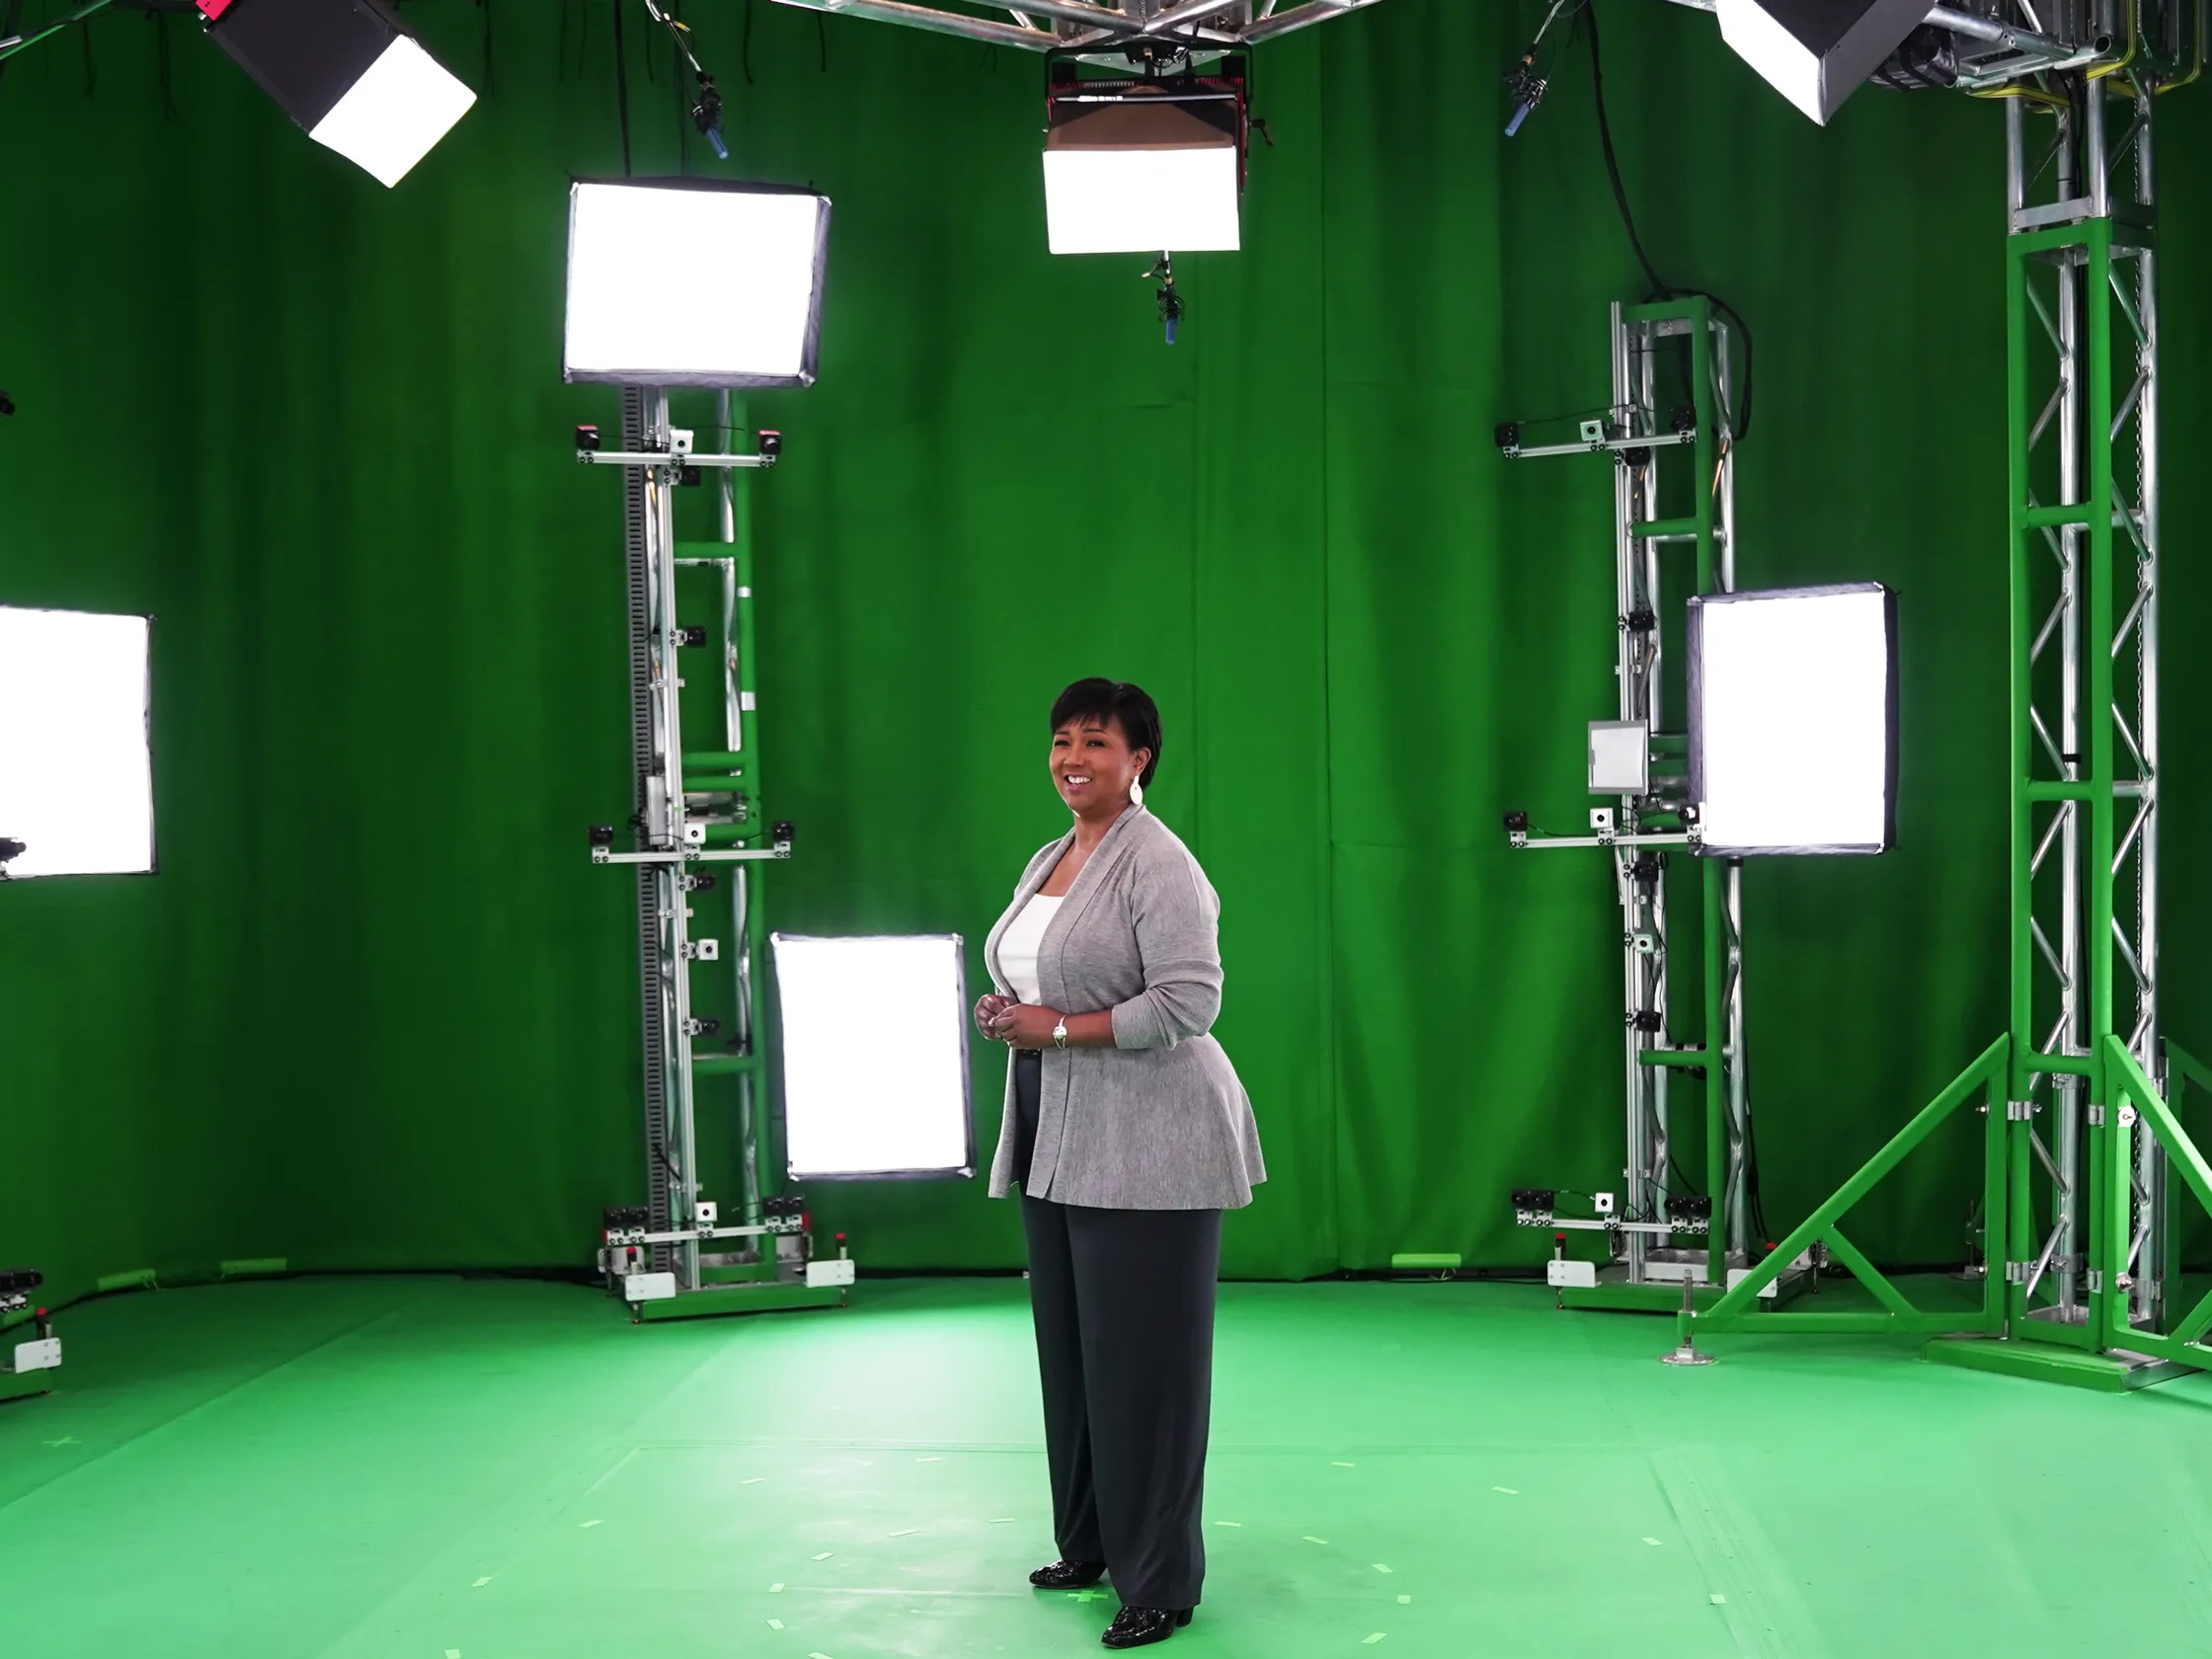 Green Screen room, arranged with several light boxes and cameras, strewn around a smiling woman in business casual clothing